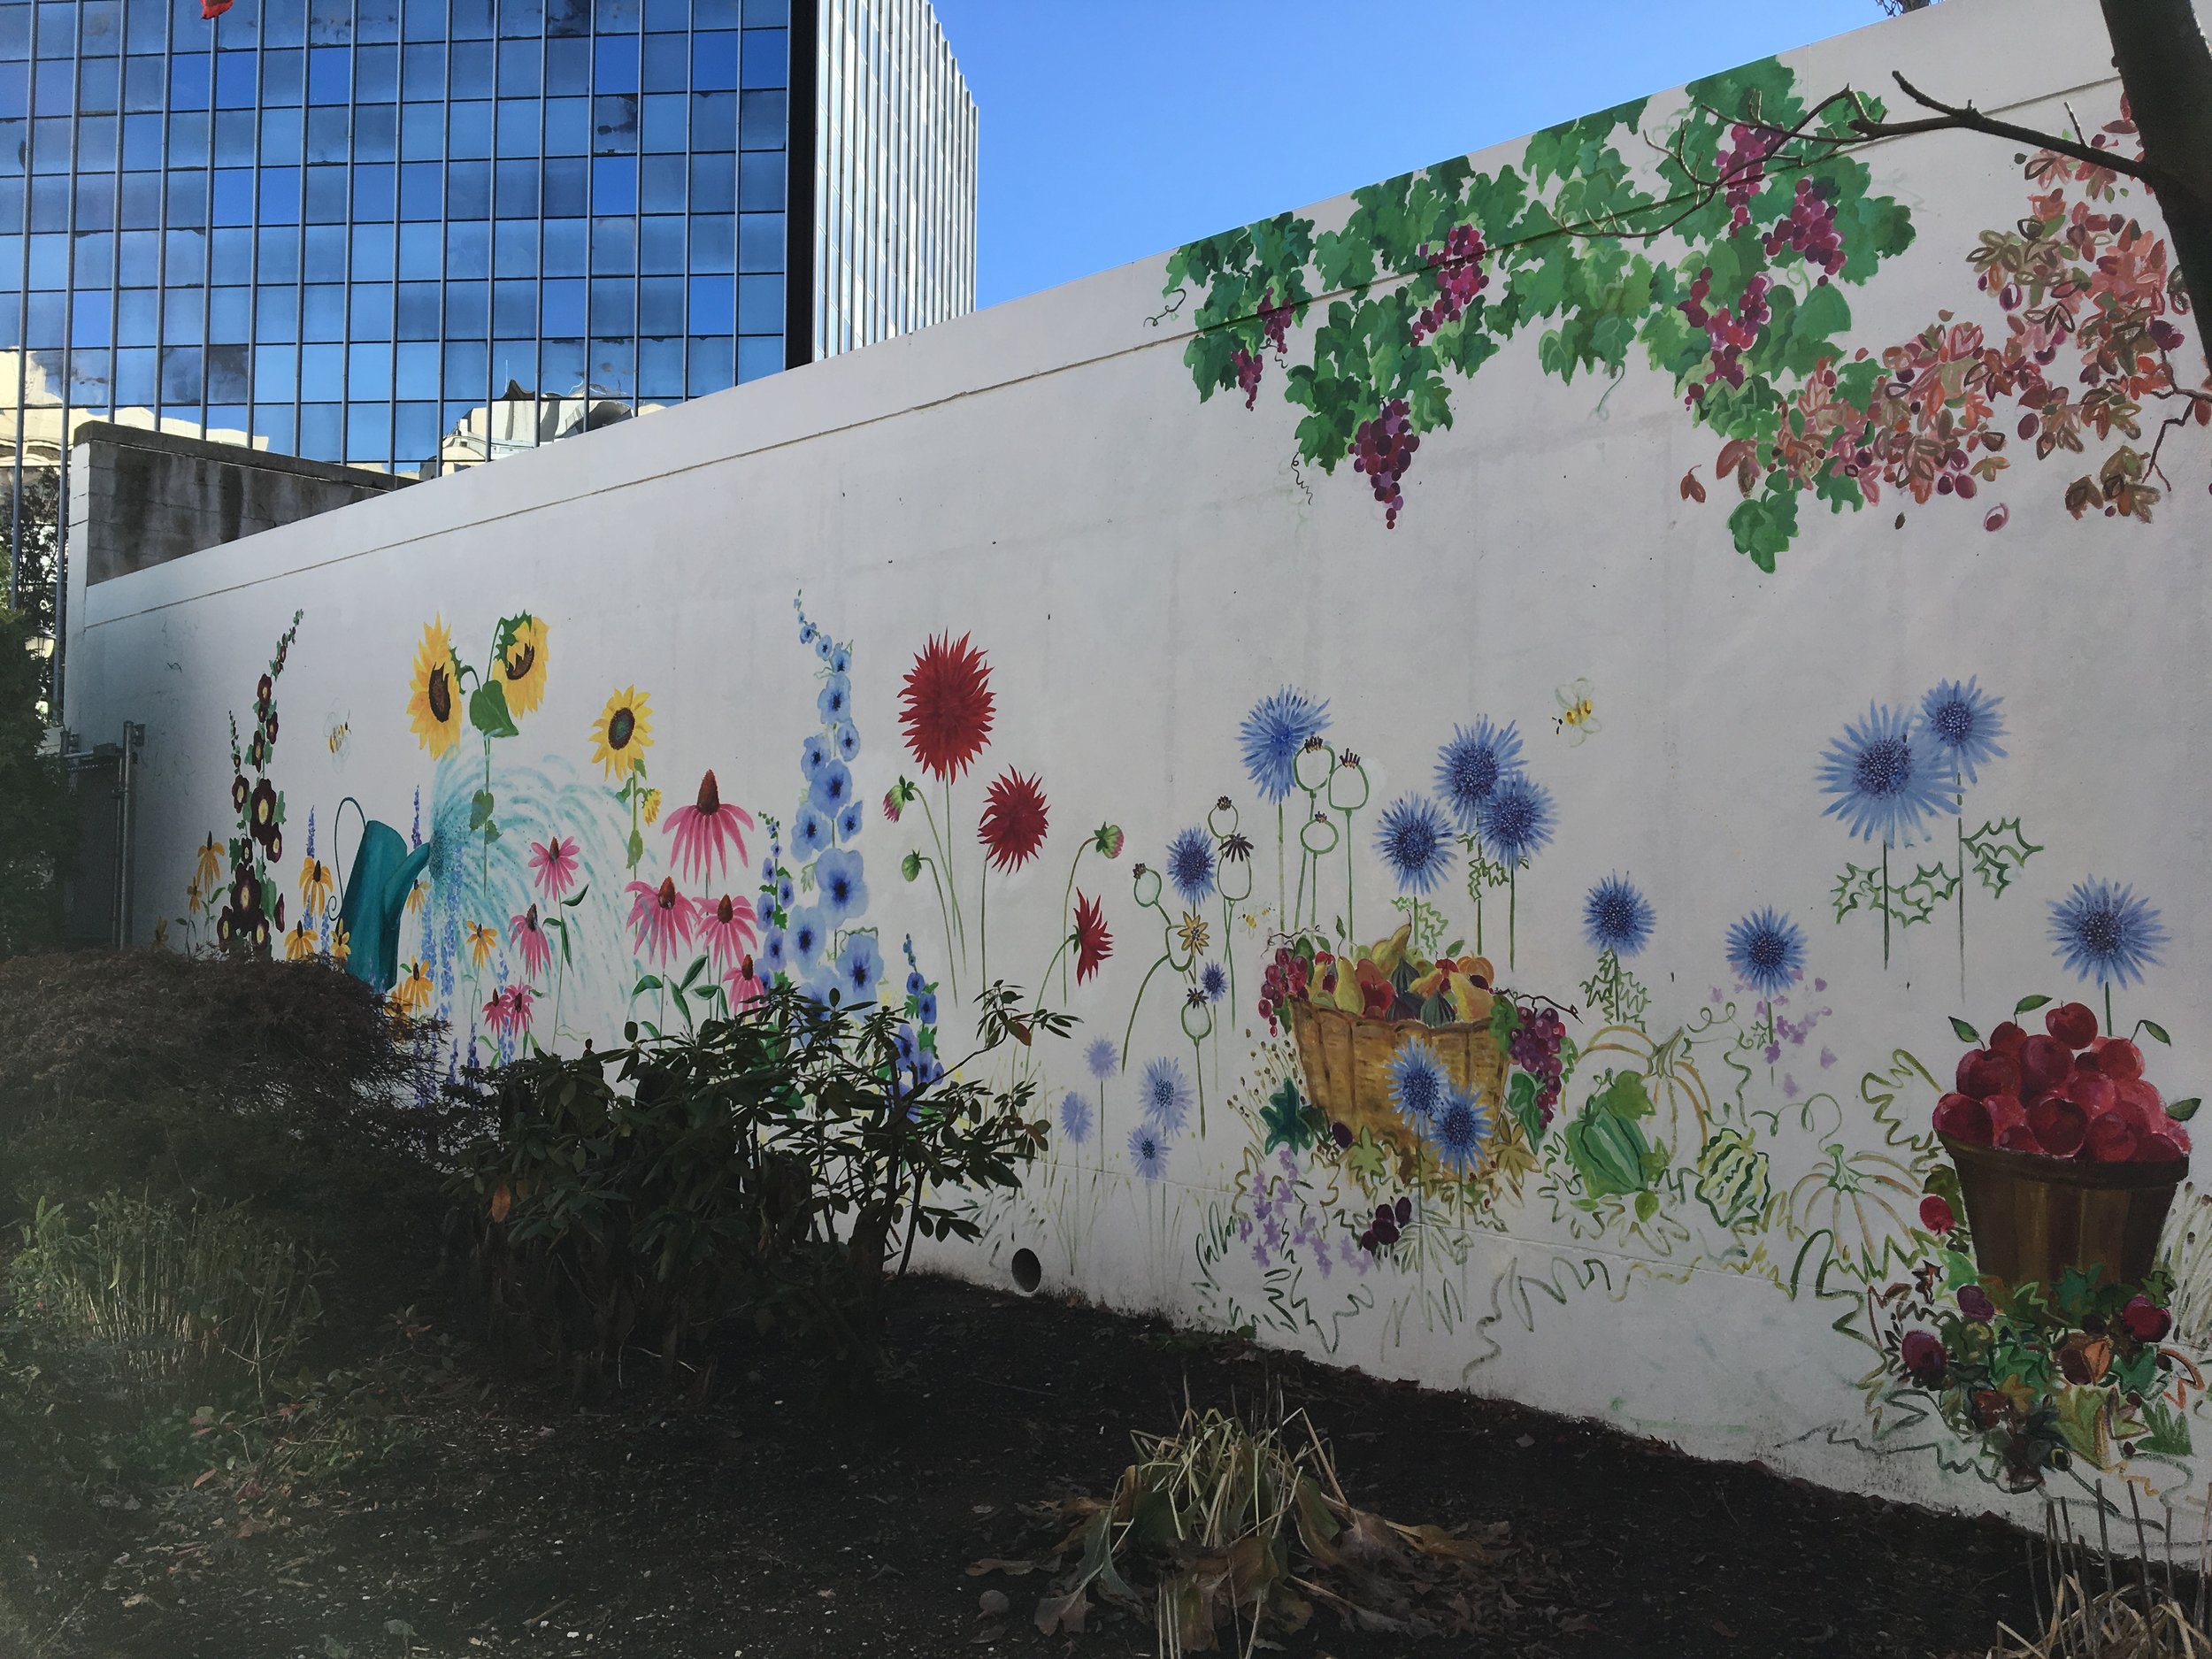  This mural was designed and painted for the Helen and Harry Gray Cancer Center at Hartford Hospital. It’s painted on the walls surrounding the two gardens outside the  chemo treatment rooms and depicts a whimsical version of the four seasons.    I c